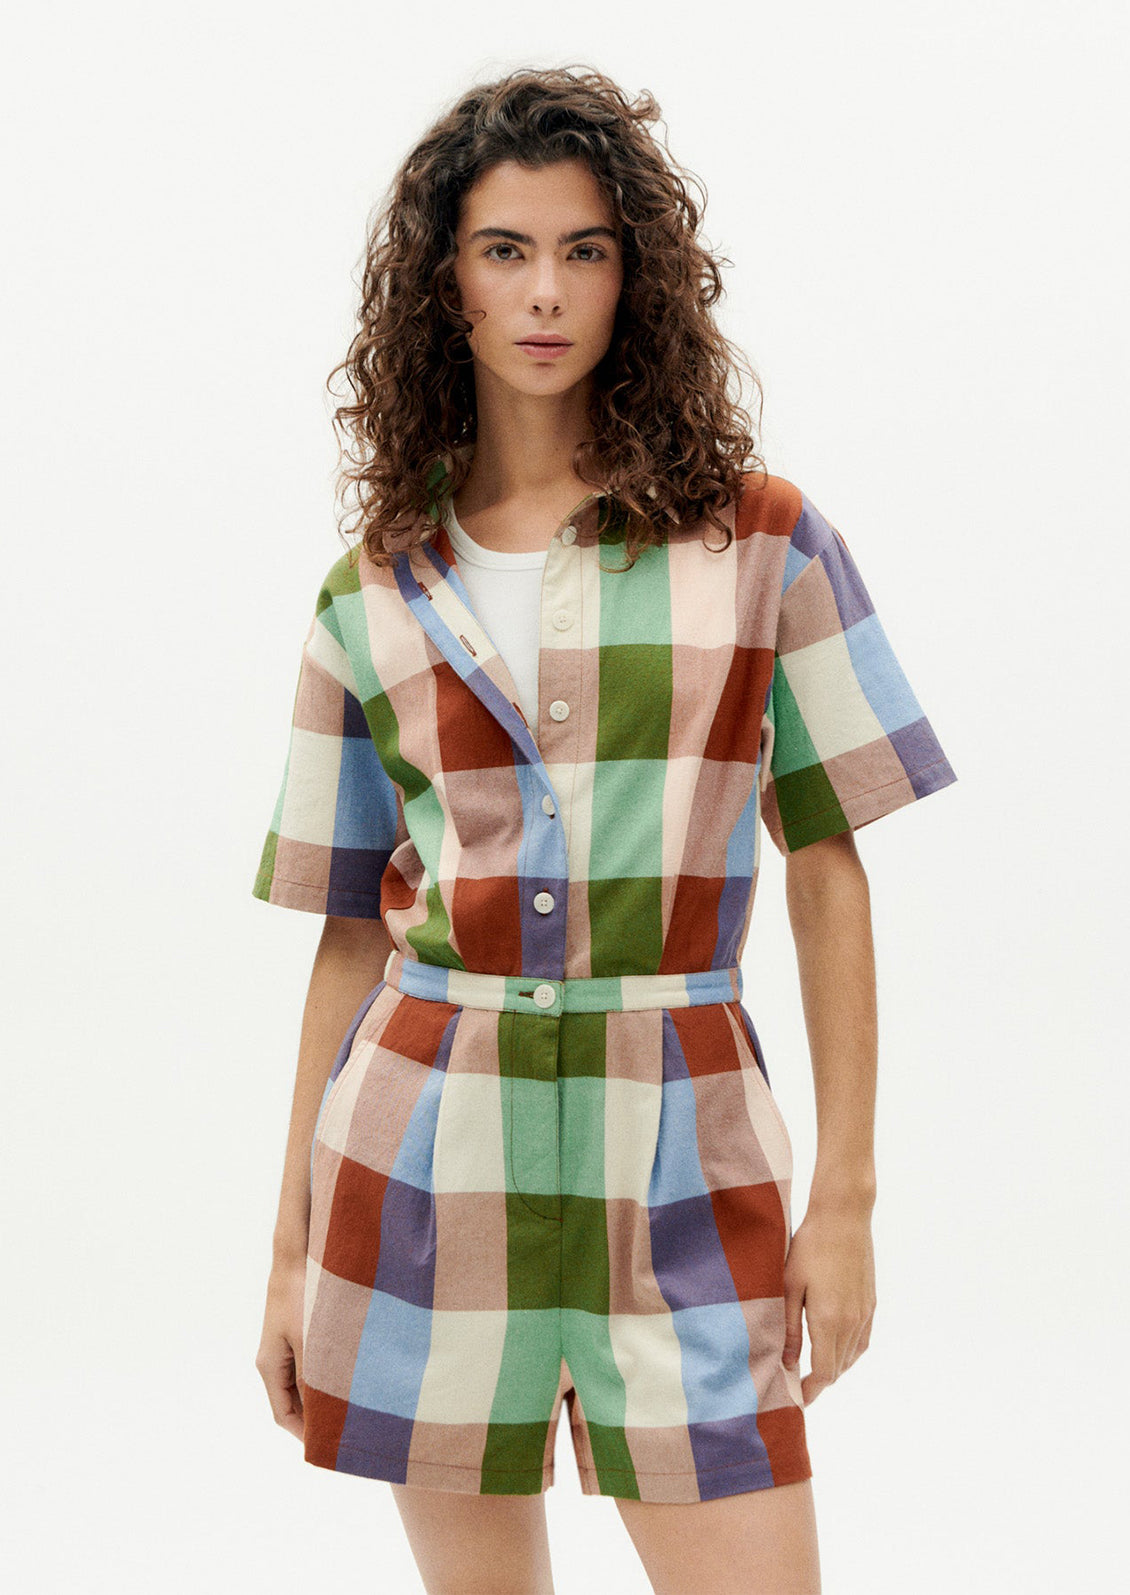 A woman wearing a romper in colorful madras cotton.